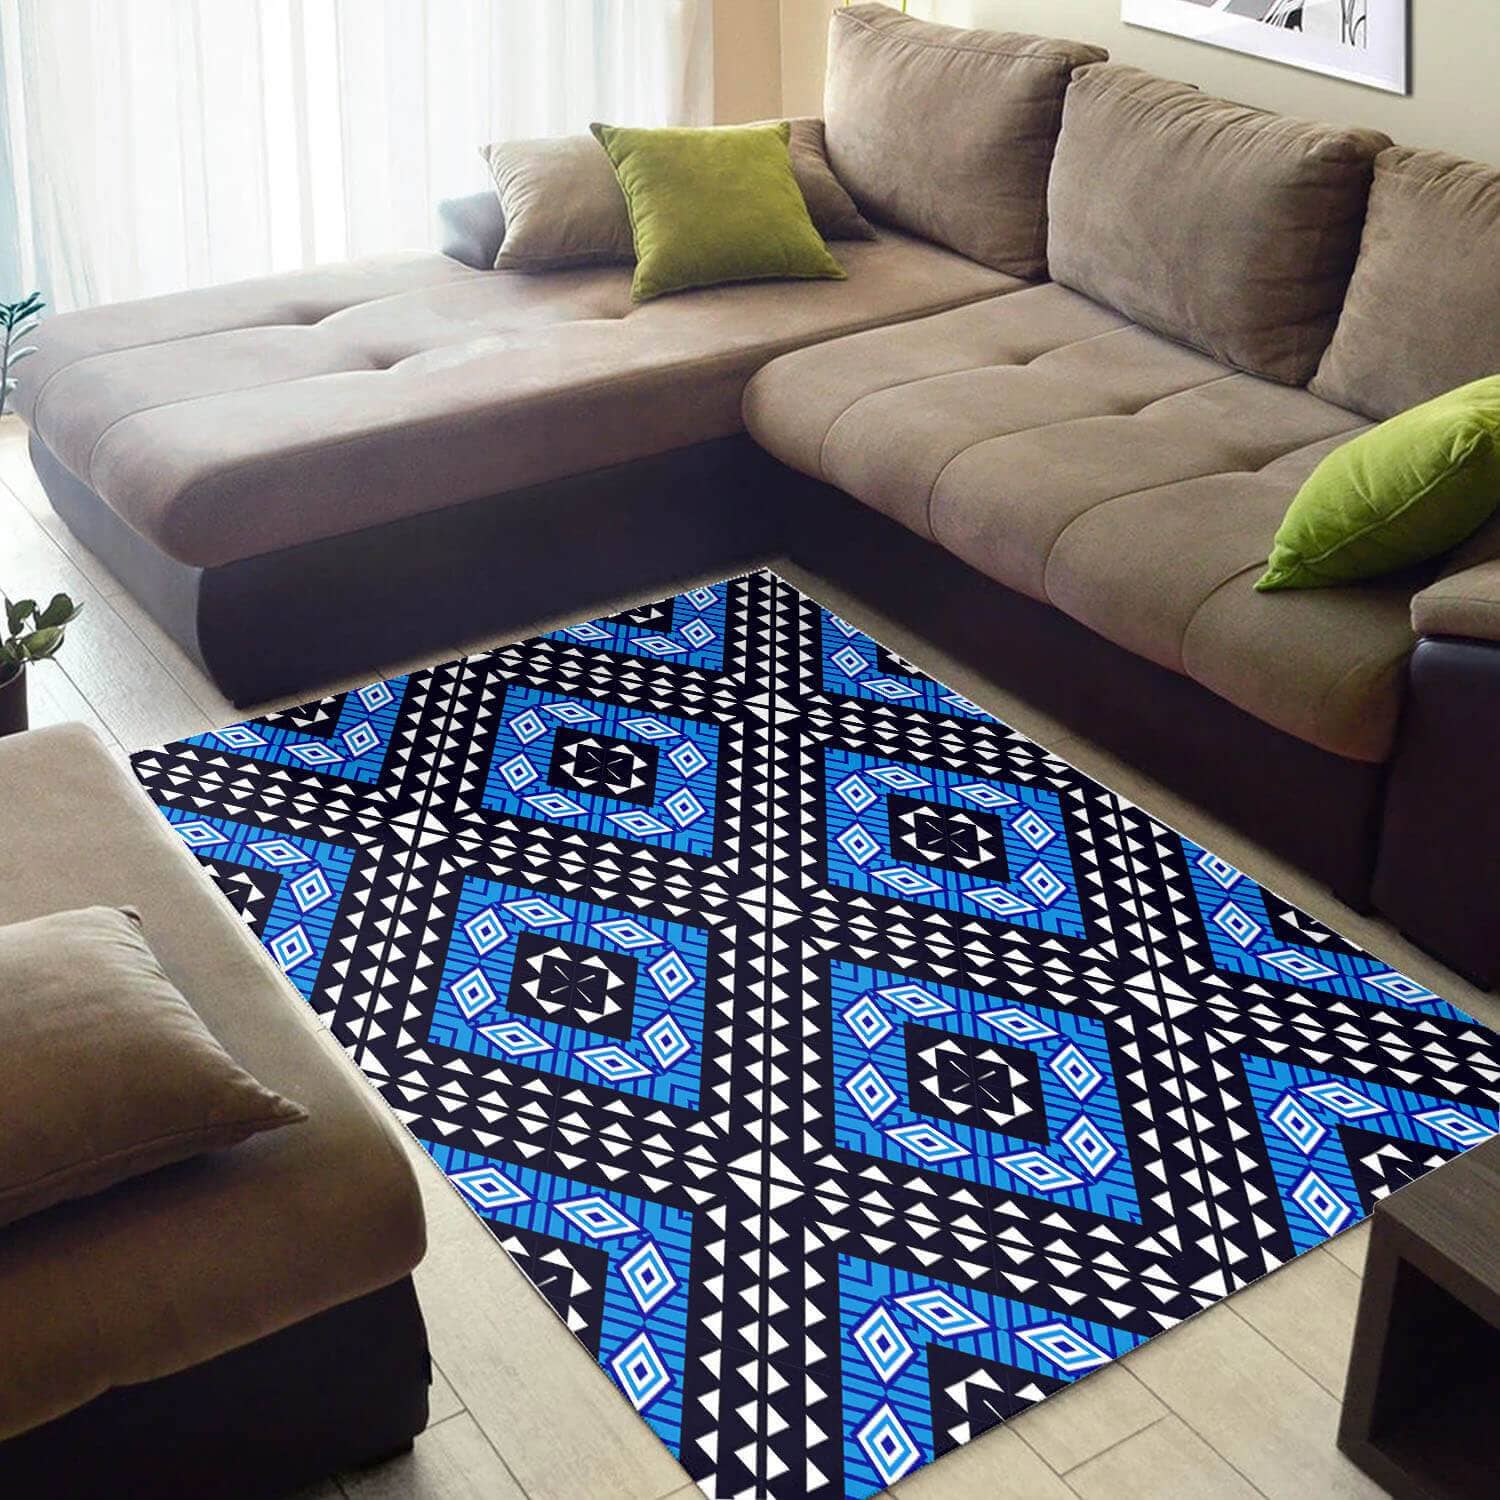 Trendy African American Modern Black History Month Afrocentric Art Design Floor Style Rug